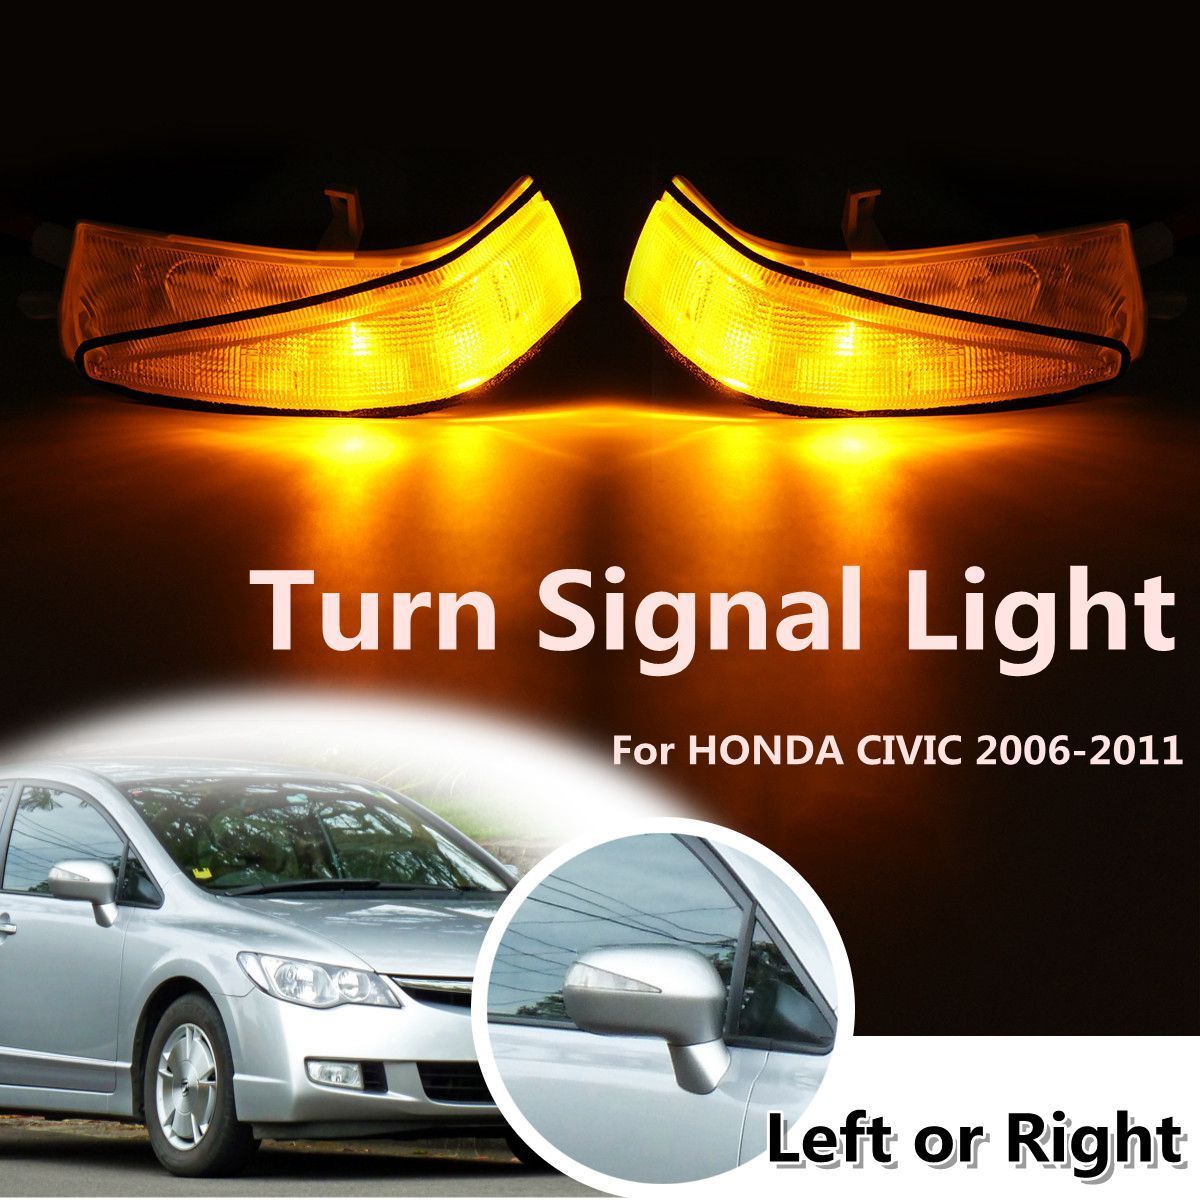 Right-Rearview-Mirror-Side-Turn-Car-Lights-Amber-LED-For-Honda-Civic-2006-2011-1539293